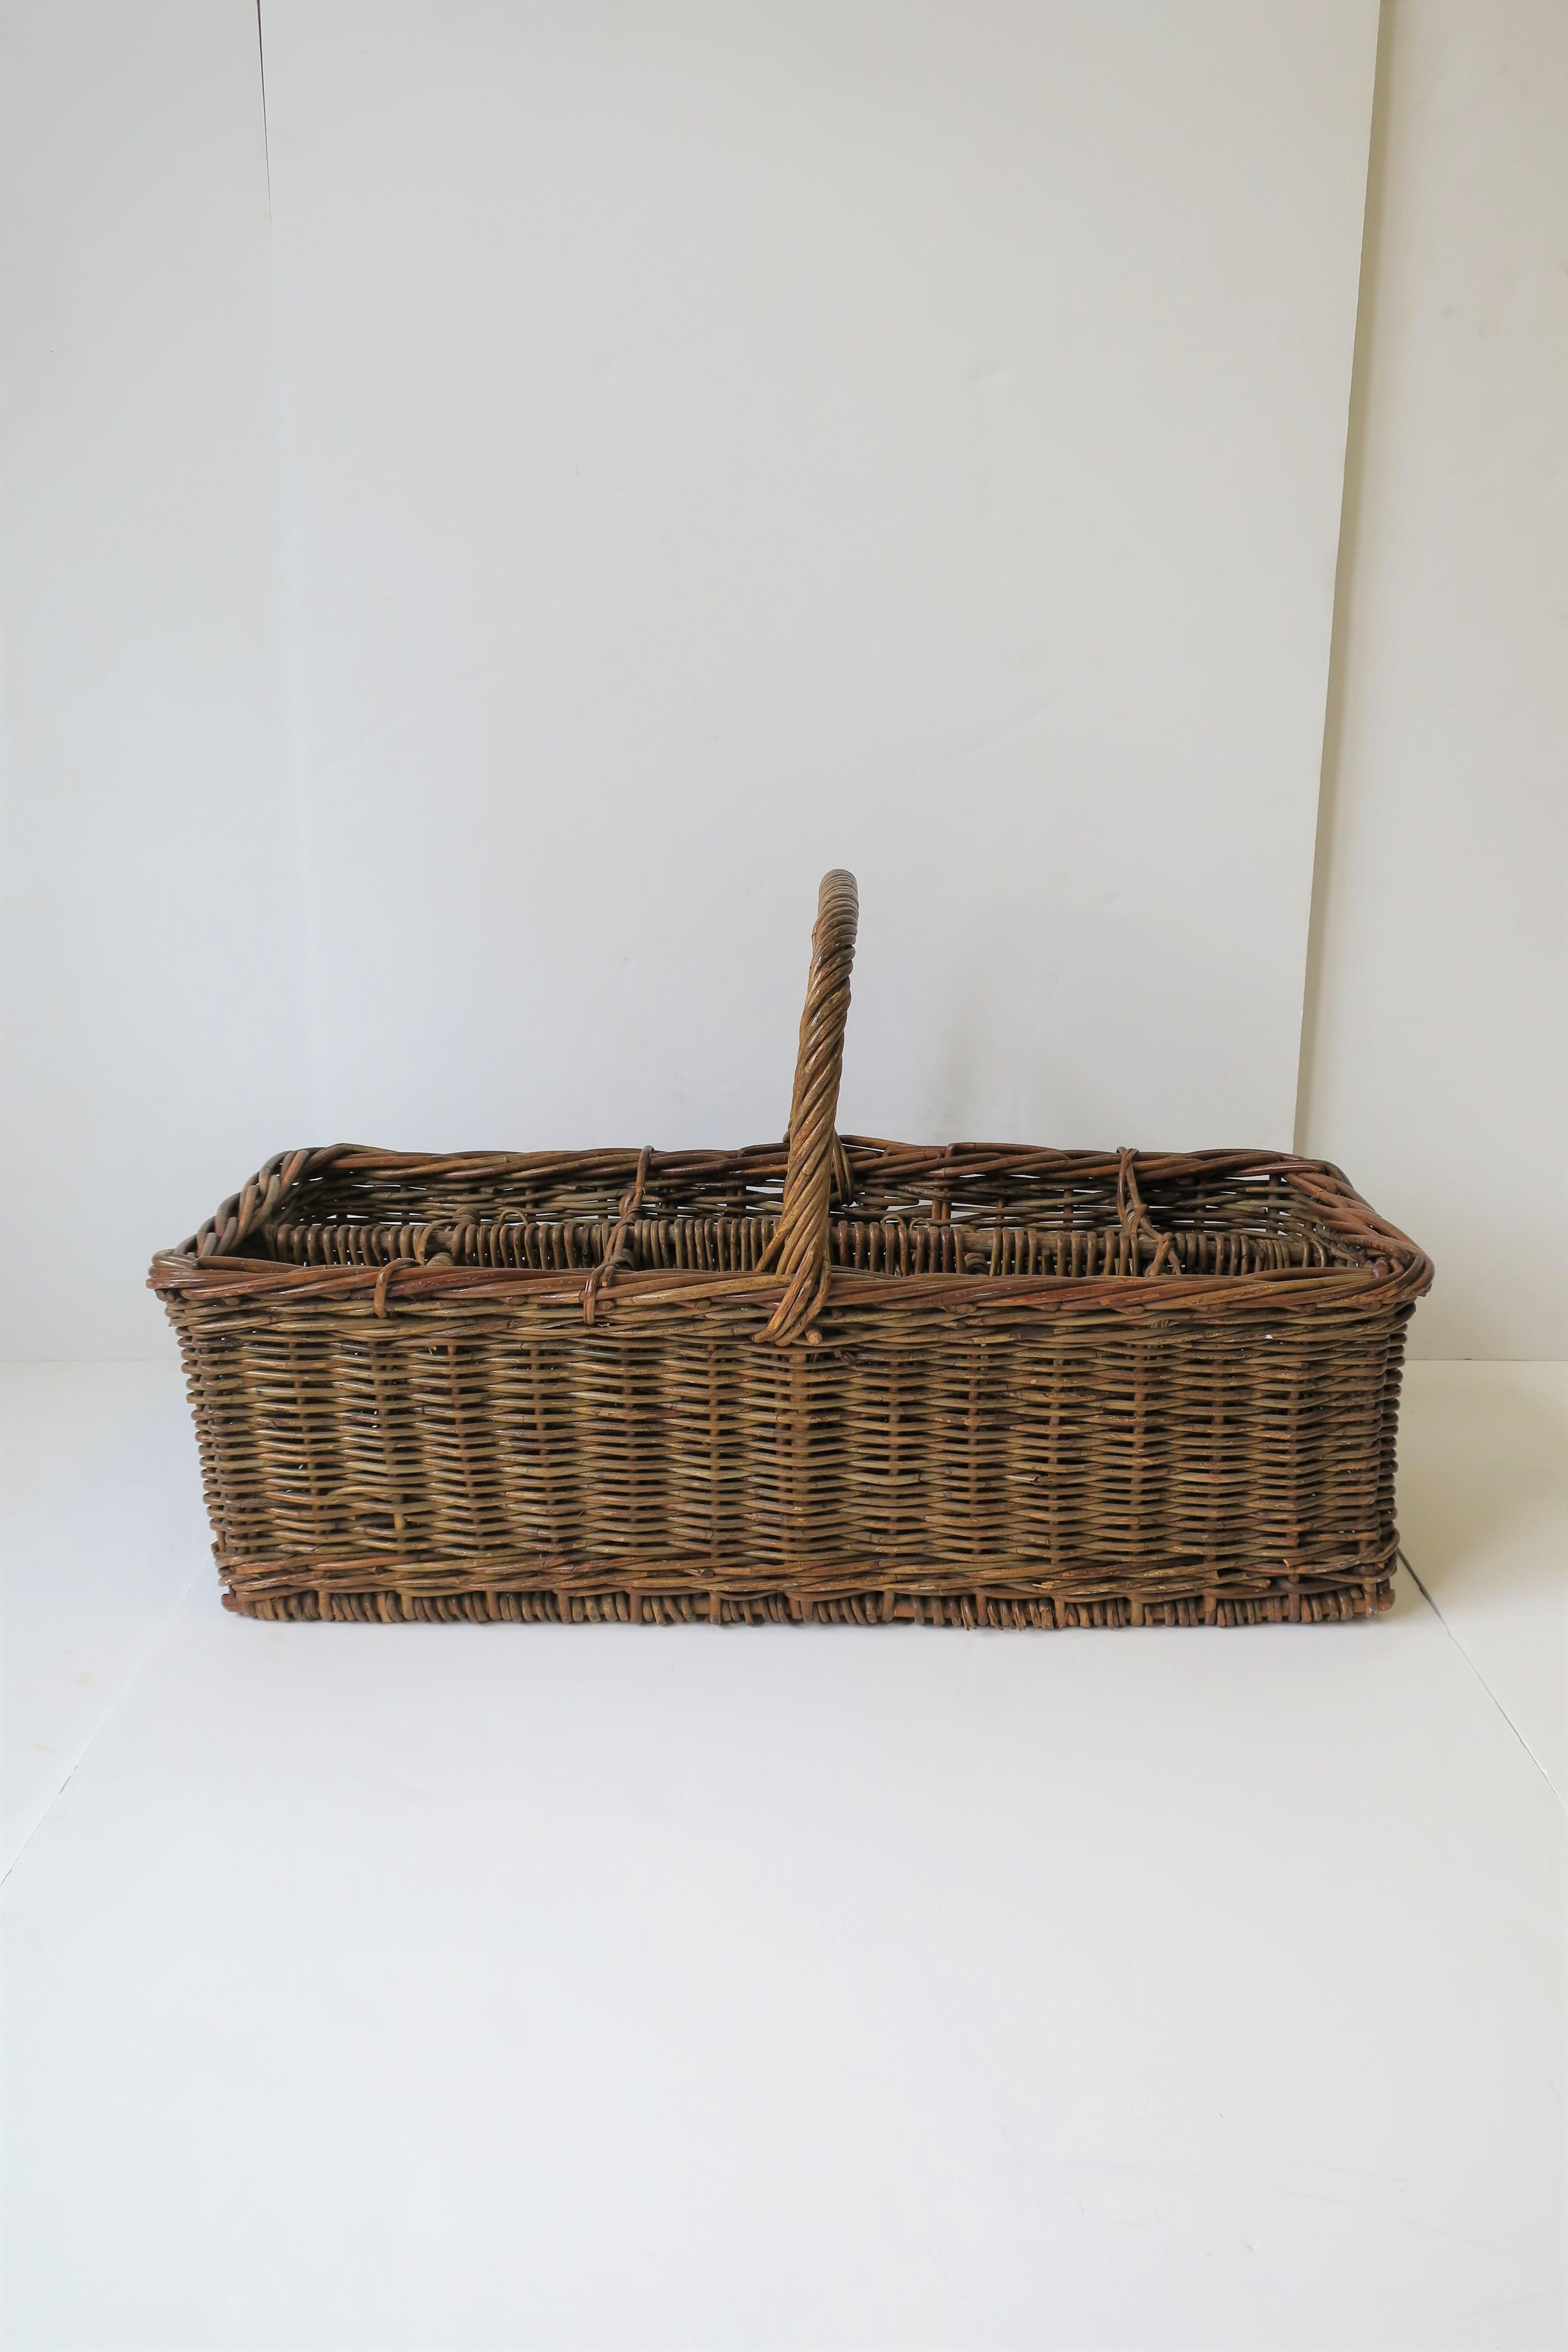 A substantial vintage wicker wine bottle holder basket with handle. 

Piece measures: 
29.5 in. W x 12 in. D x 16.75 in. H to top of handle.

  